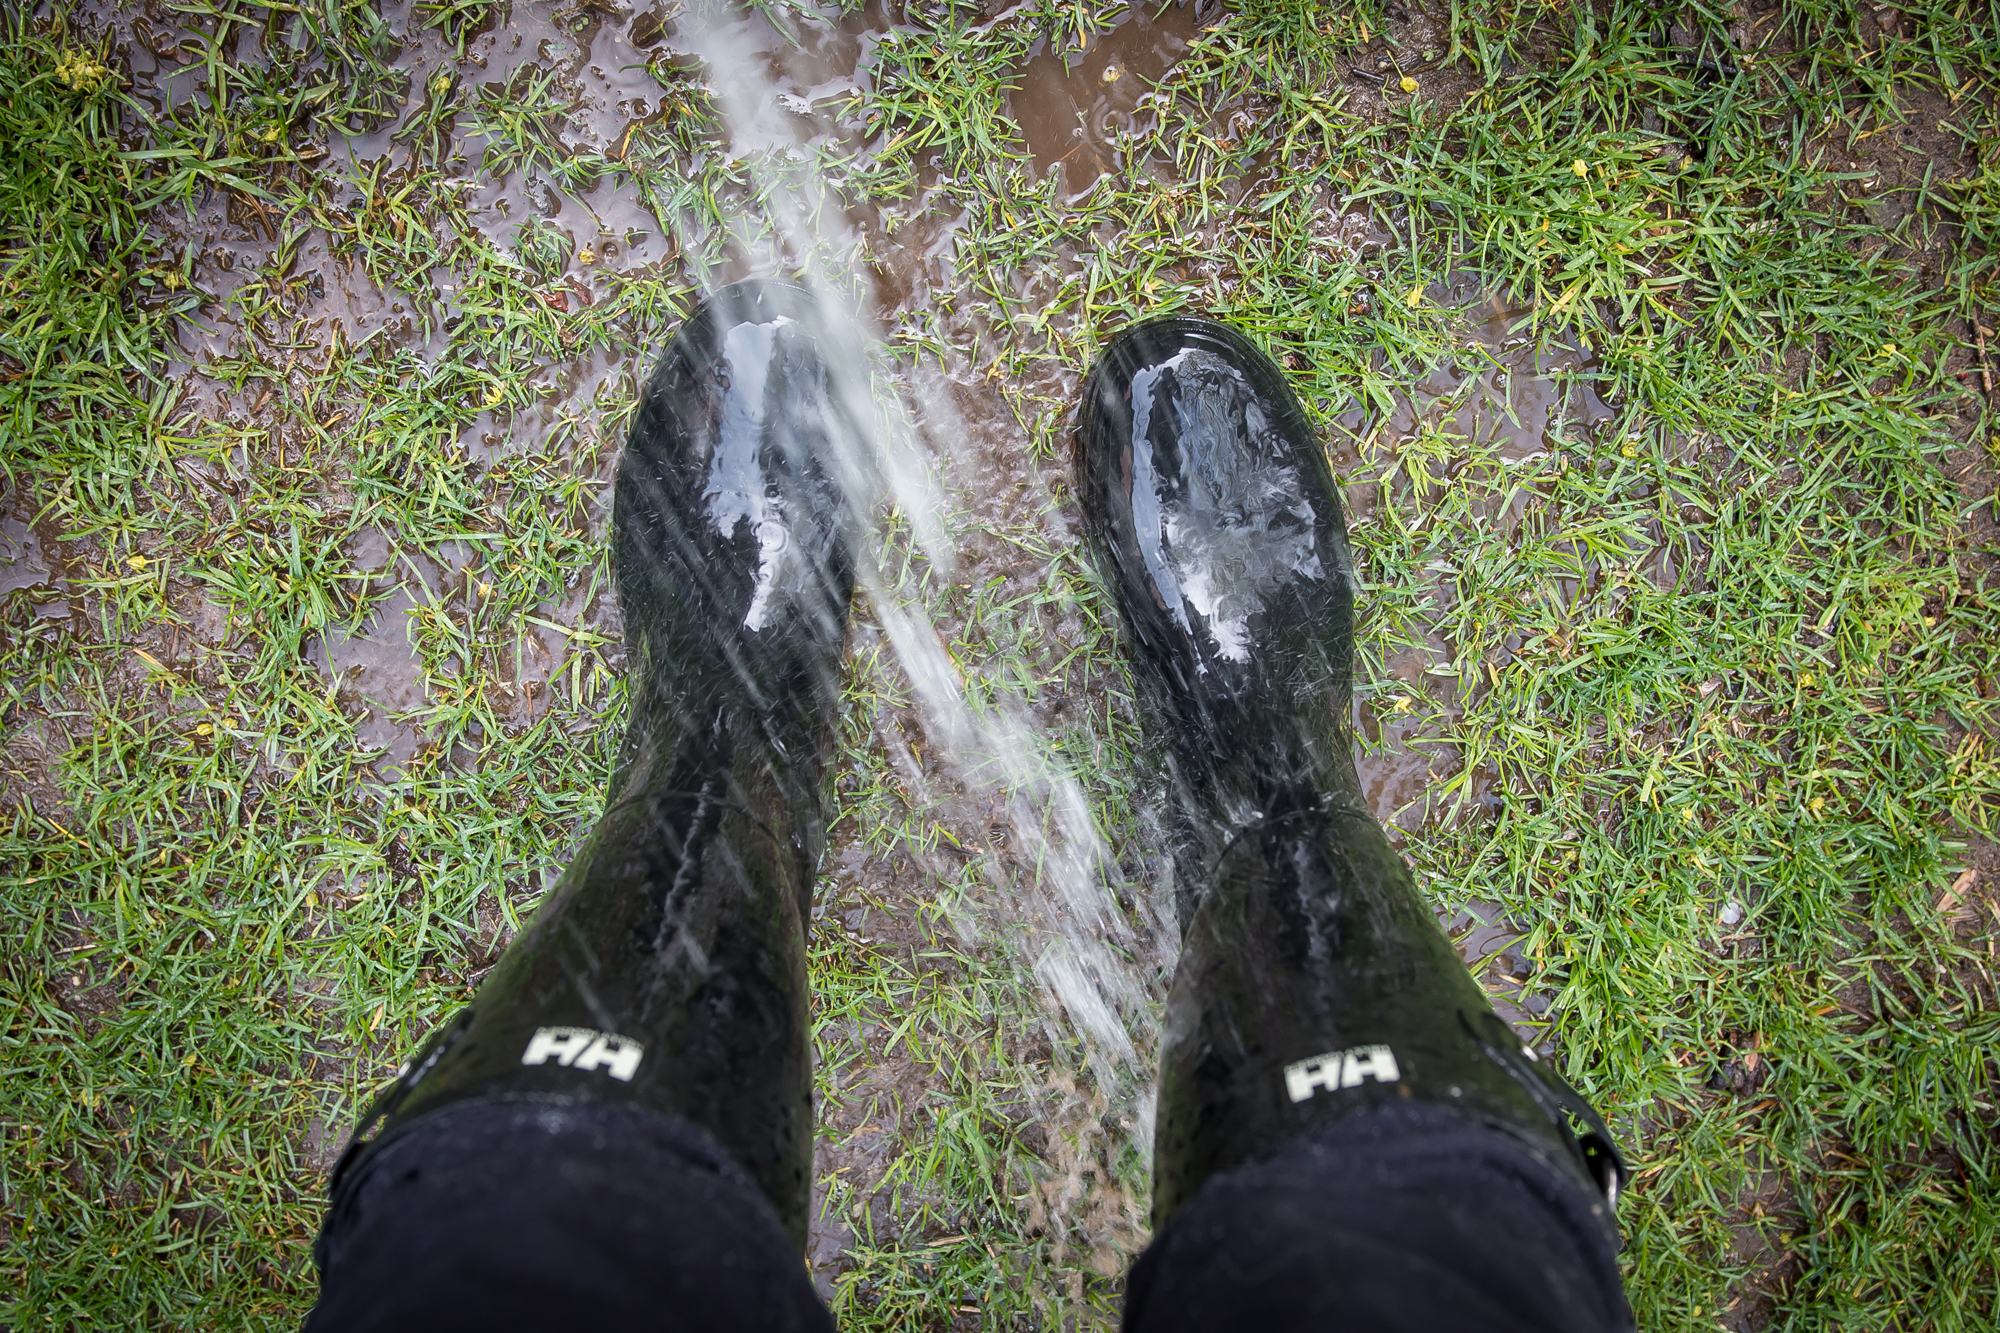 Comfort: warm water washing over muddy rubber boots.